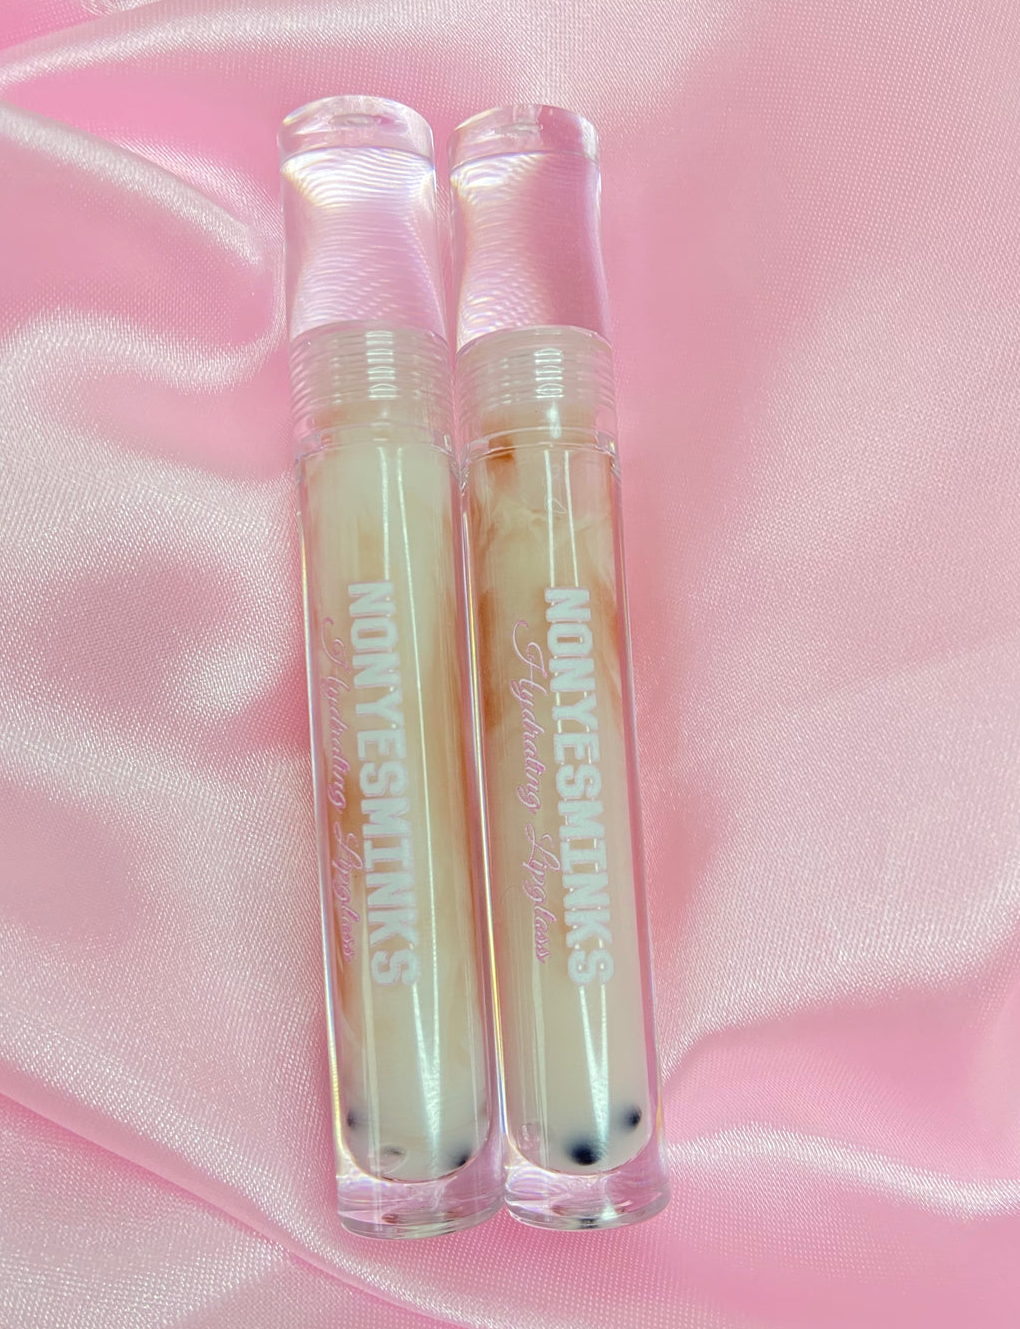 two lip gloss tube that are made to look like milk tea